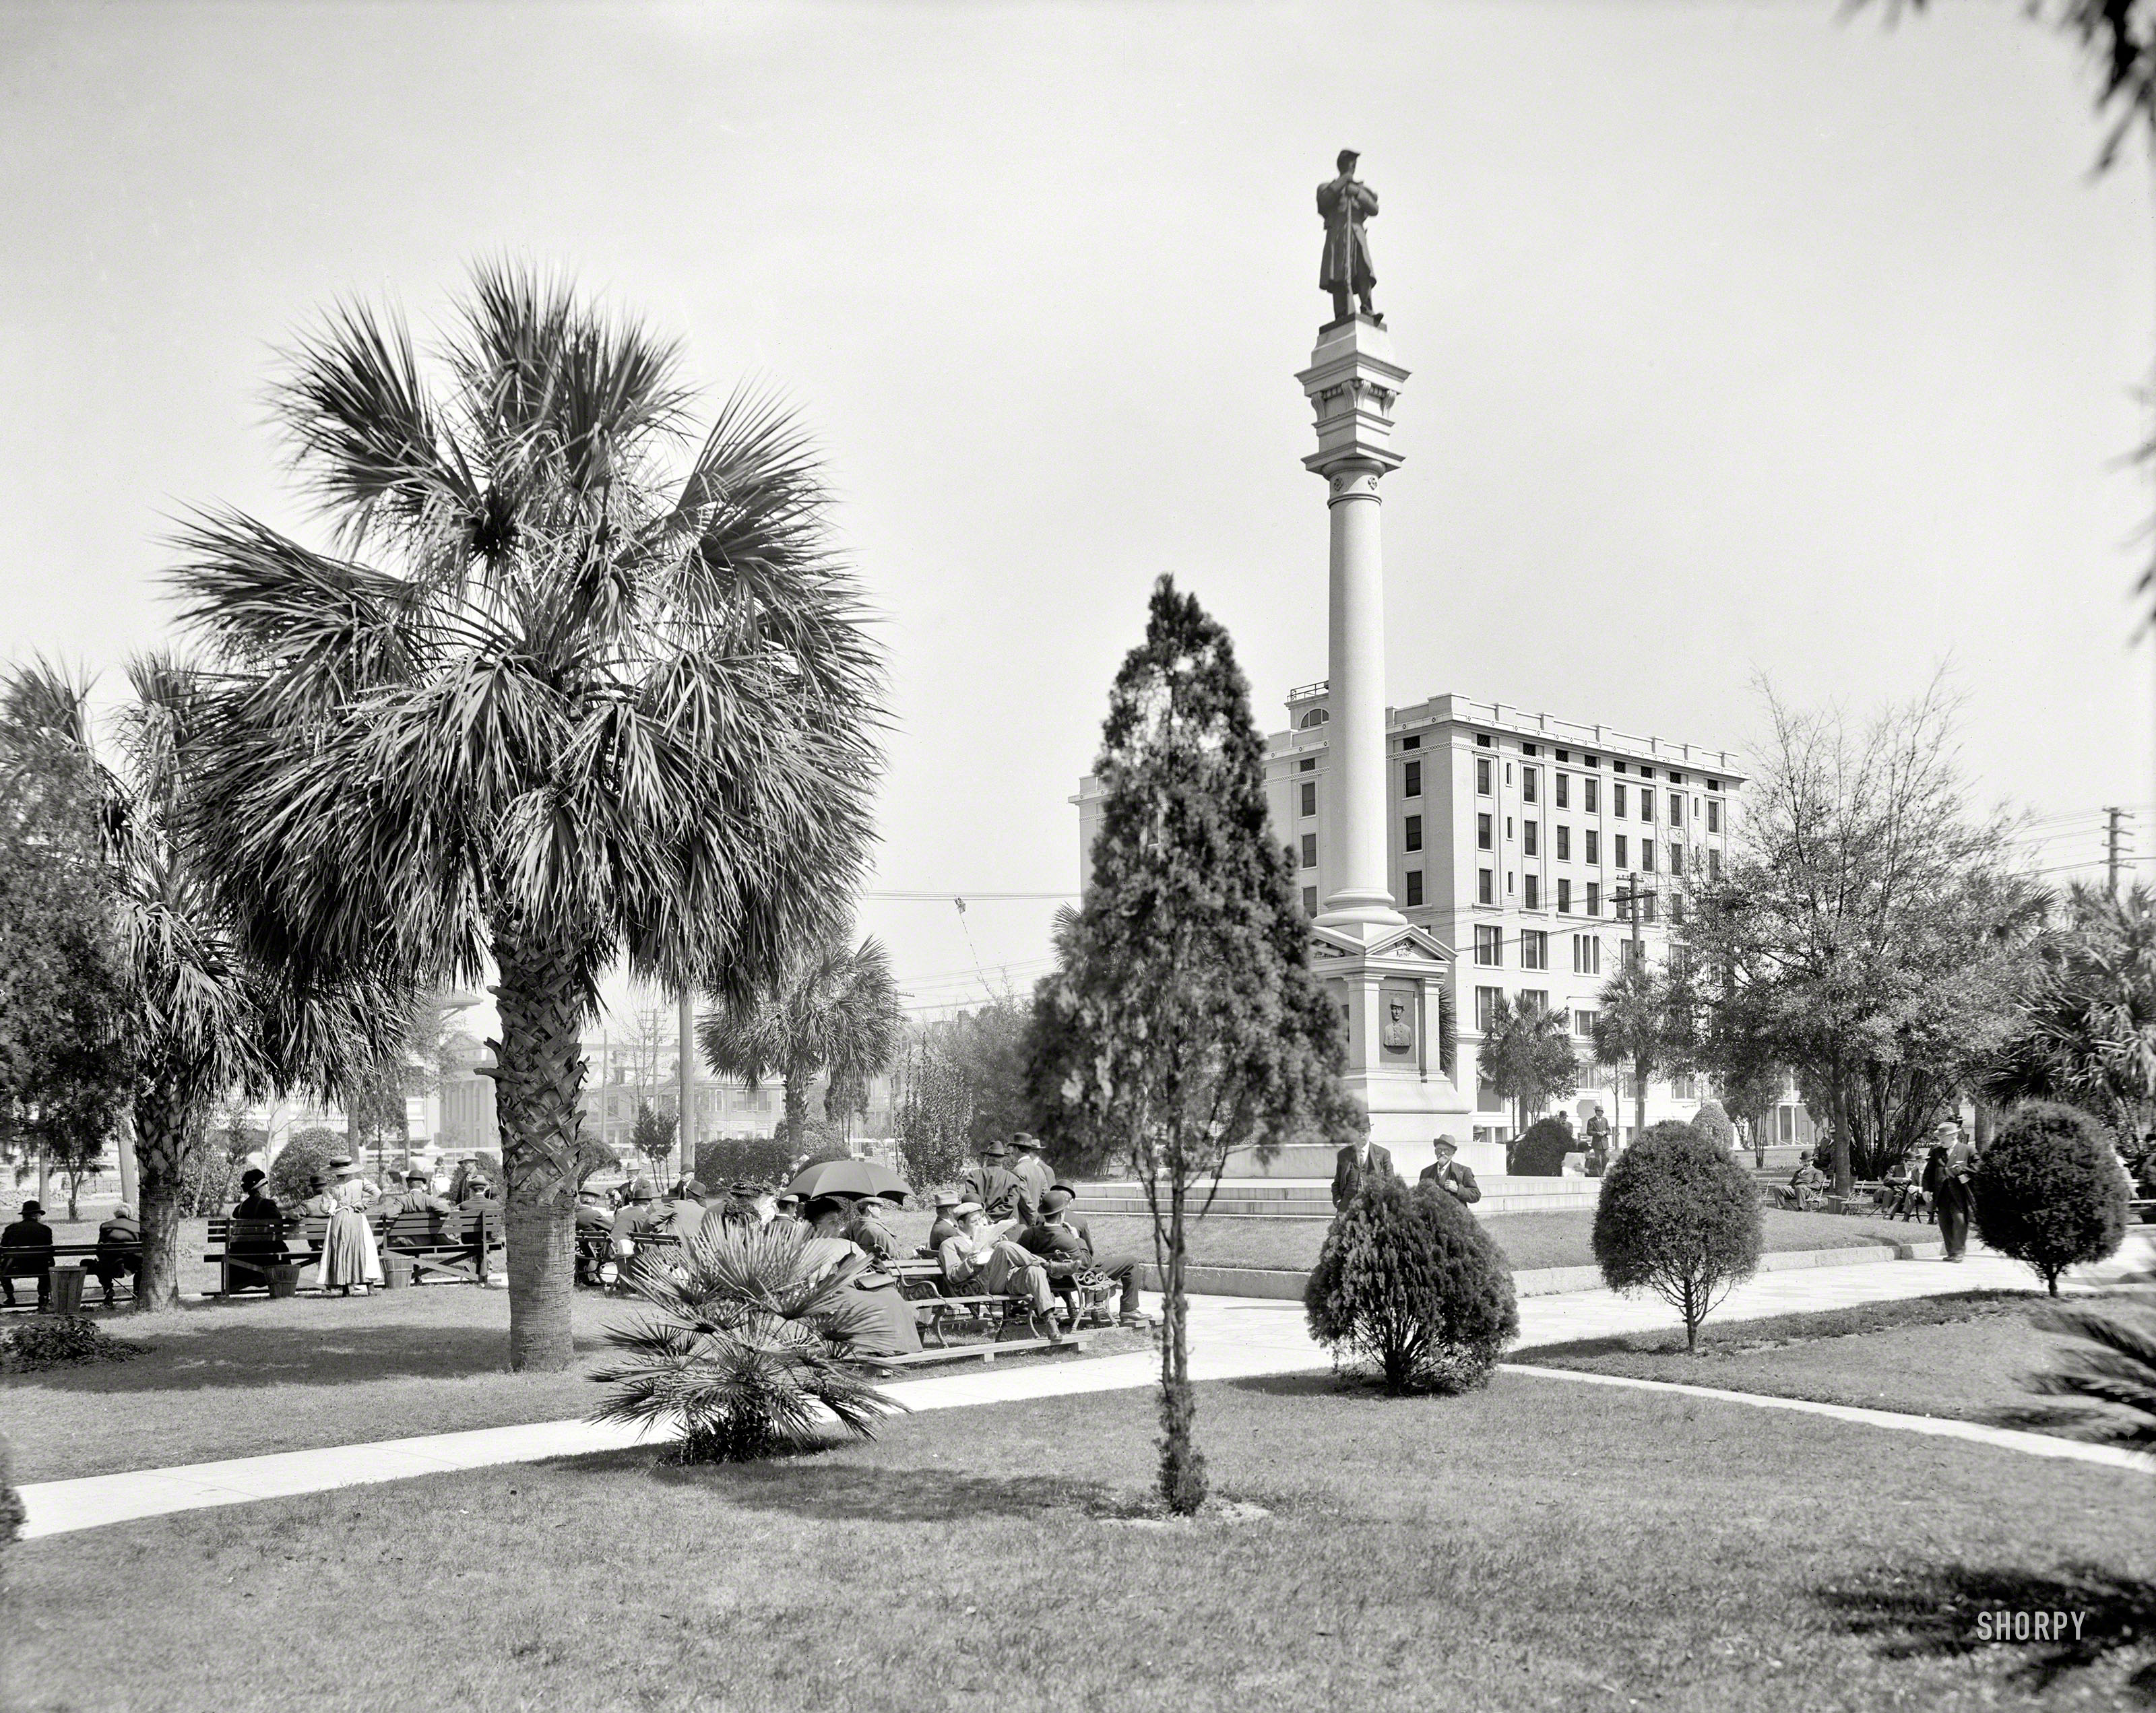 Jacksonville, Florida, circa 1910. "Hemming Park. Confederate monument and Y.M.C.A." 8x10 glass negative, Detroit Publishing Co. View full size.